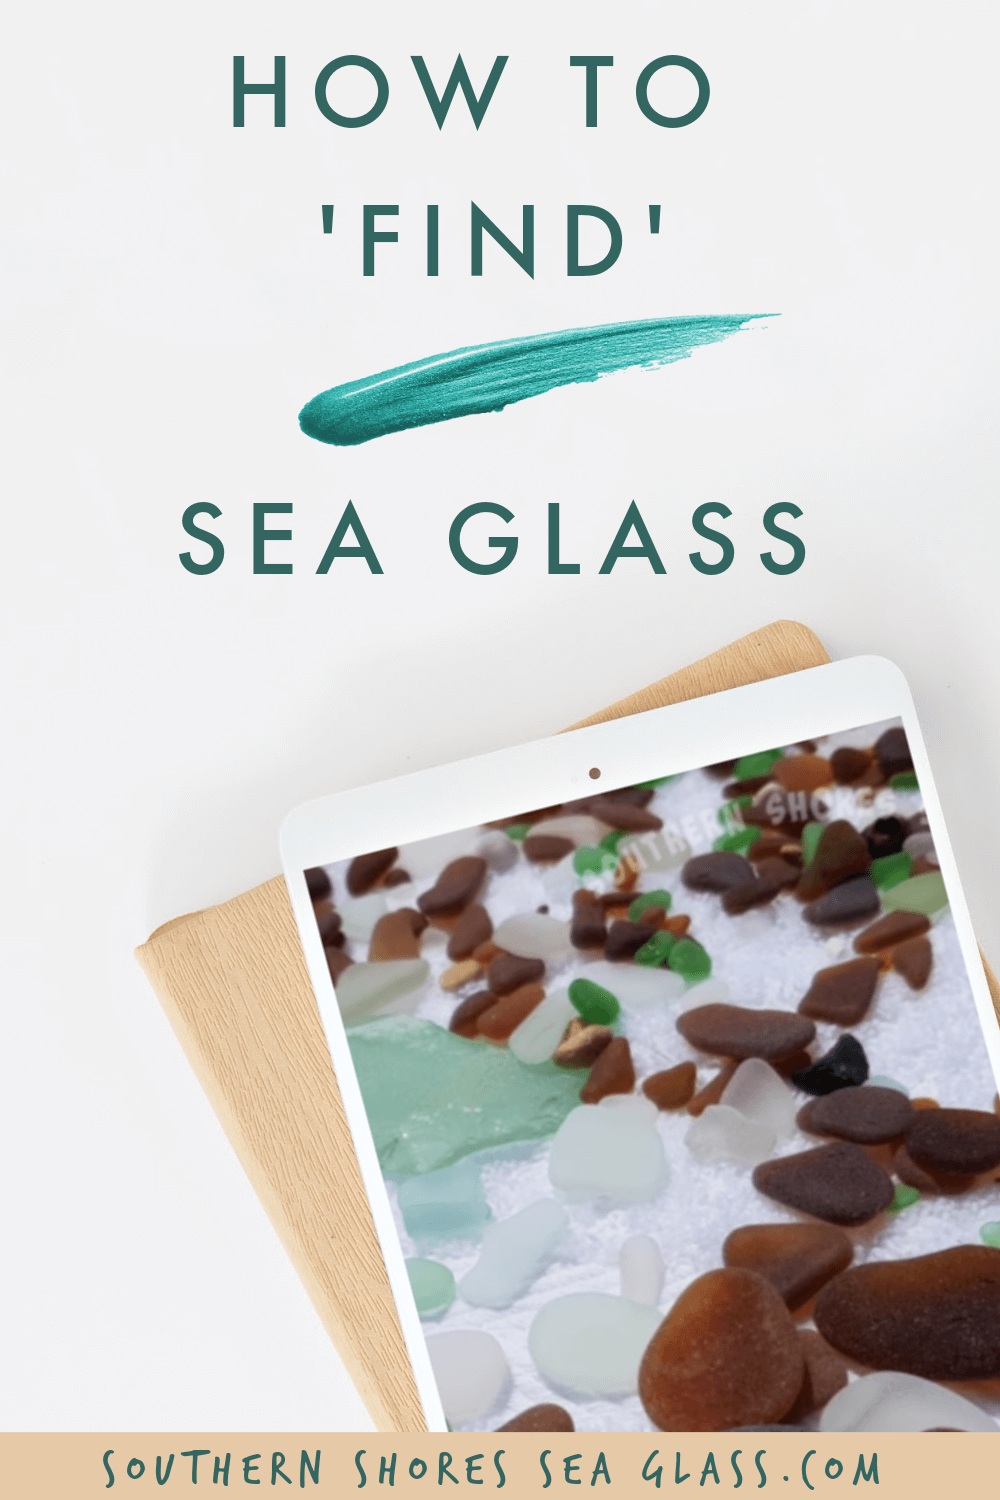 How To Find Sea Glass to add to your collection and the tips and tricks to make sure you return with a great stash